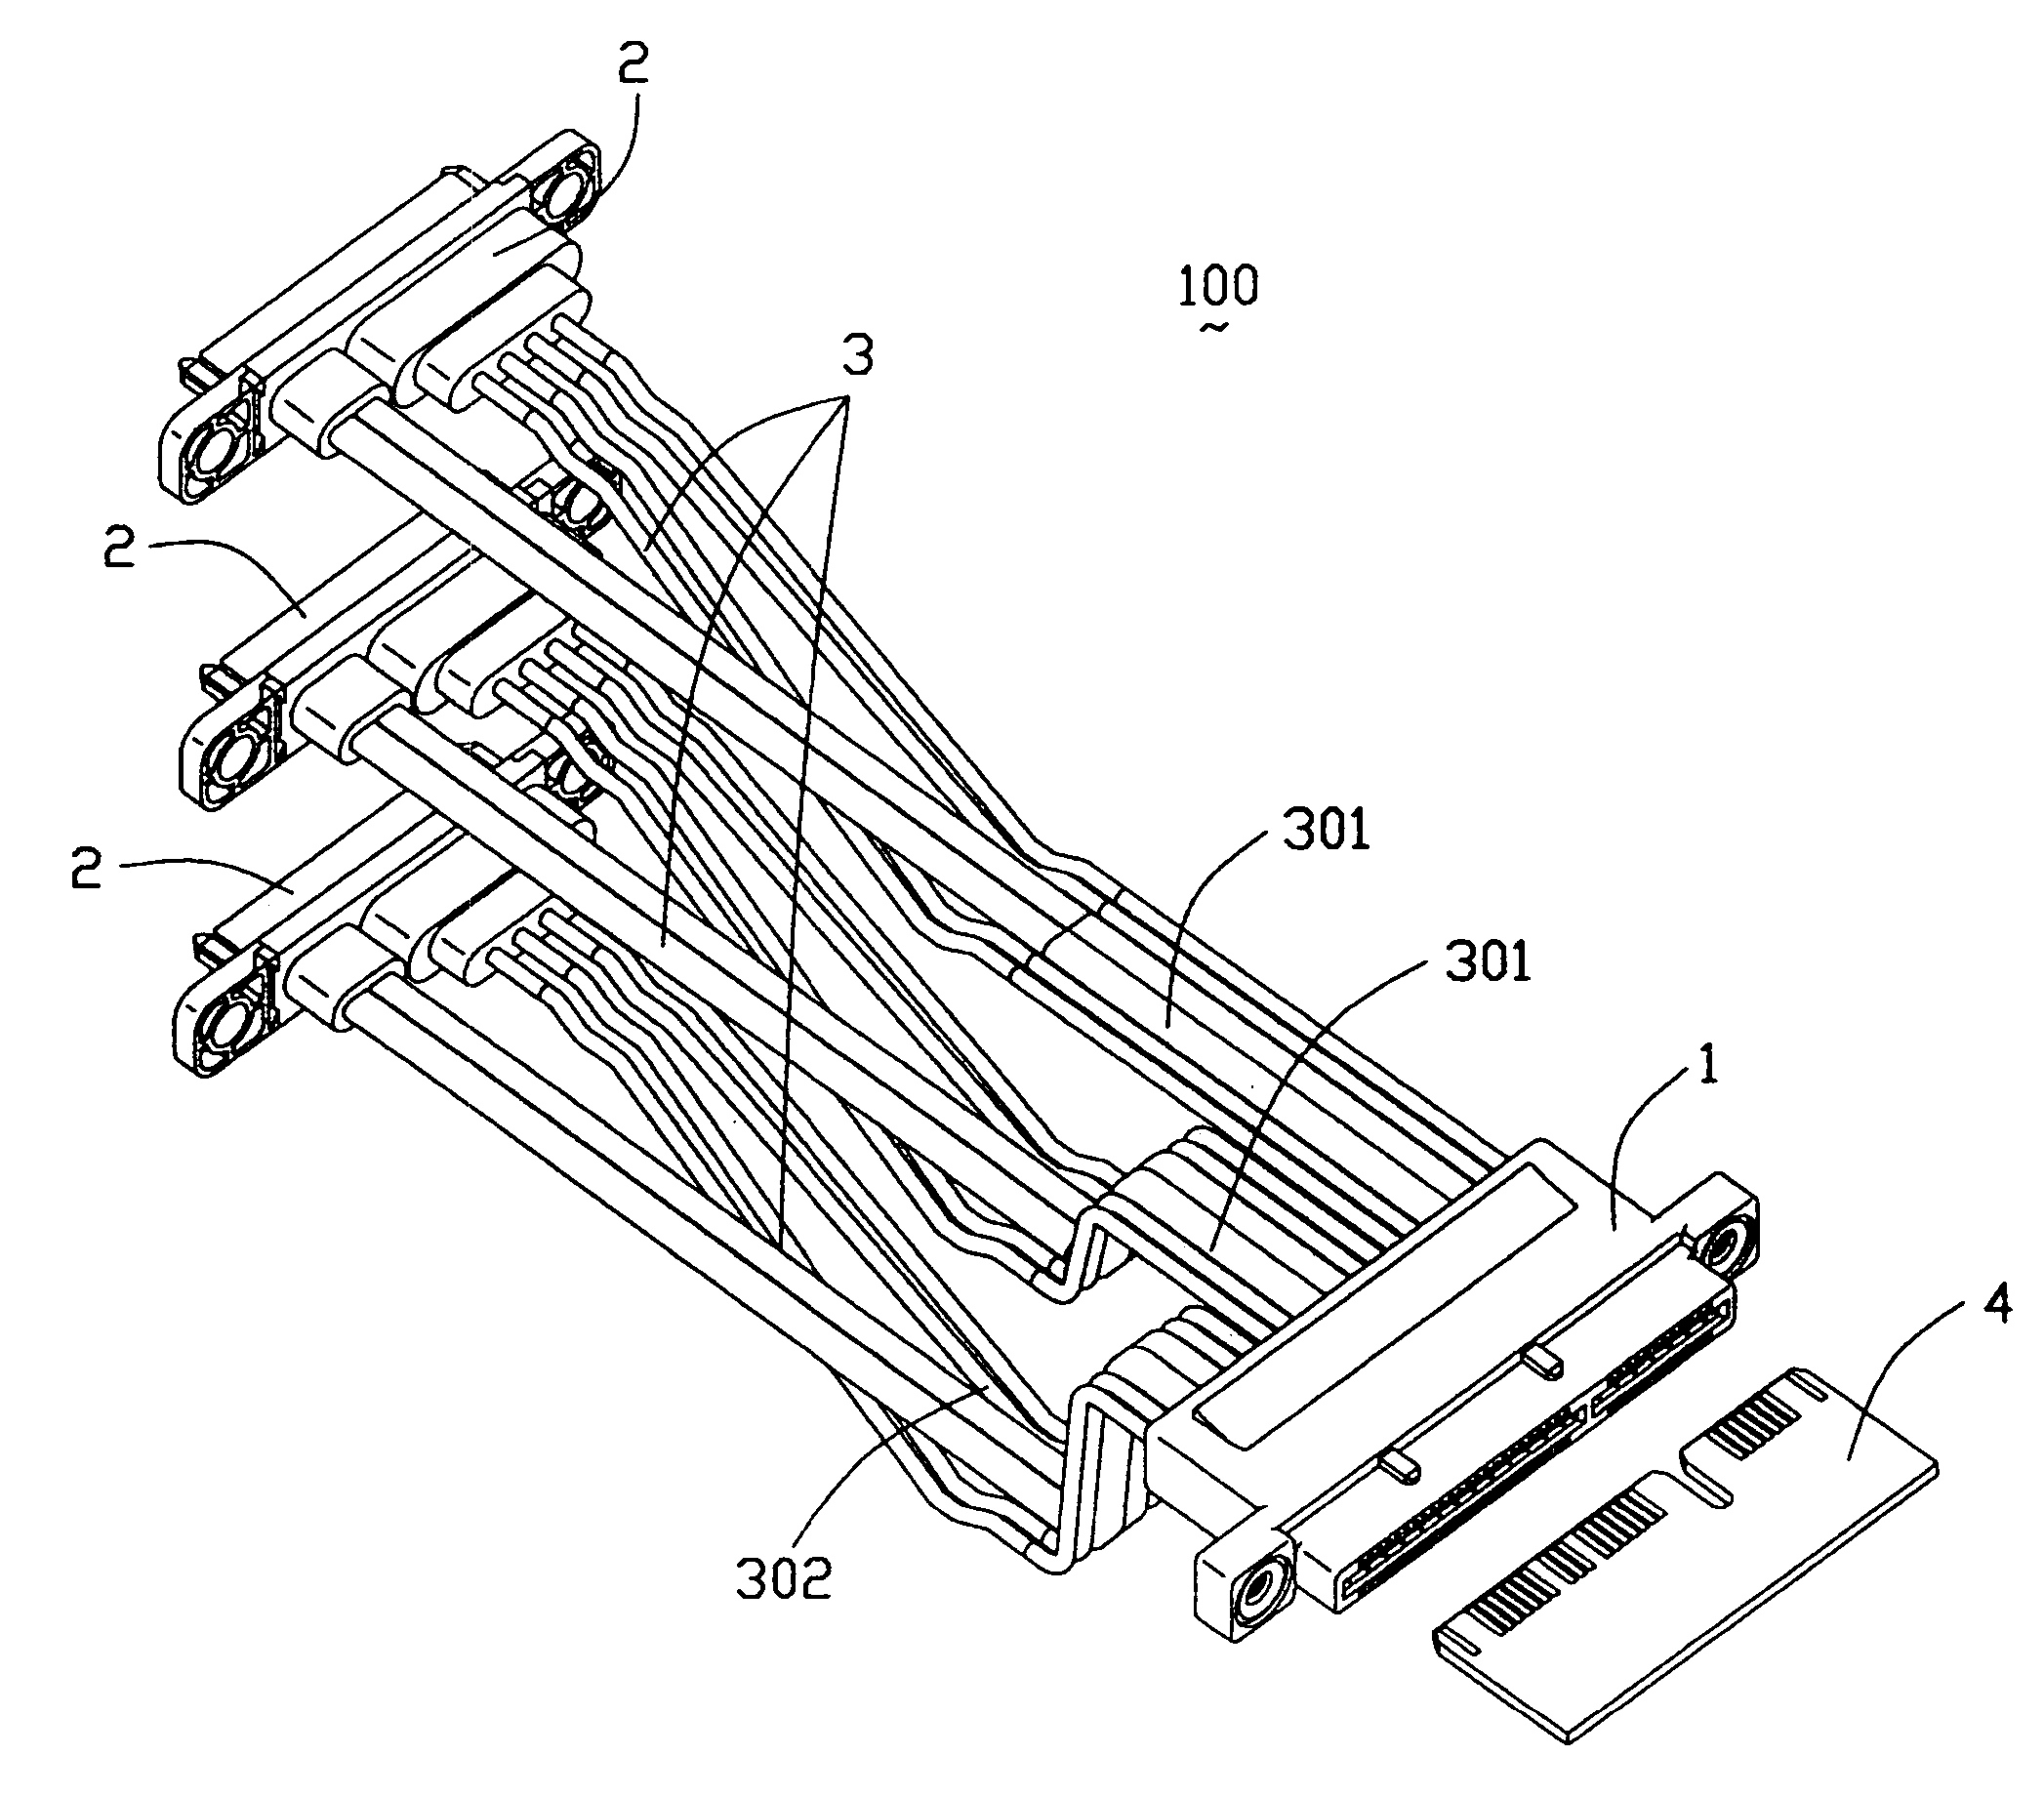 Single-port to multi-port cable assembly